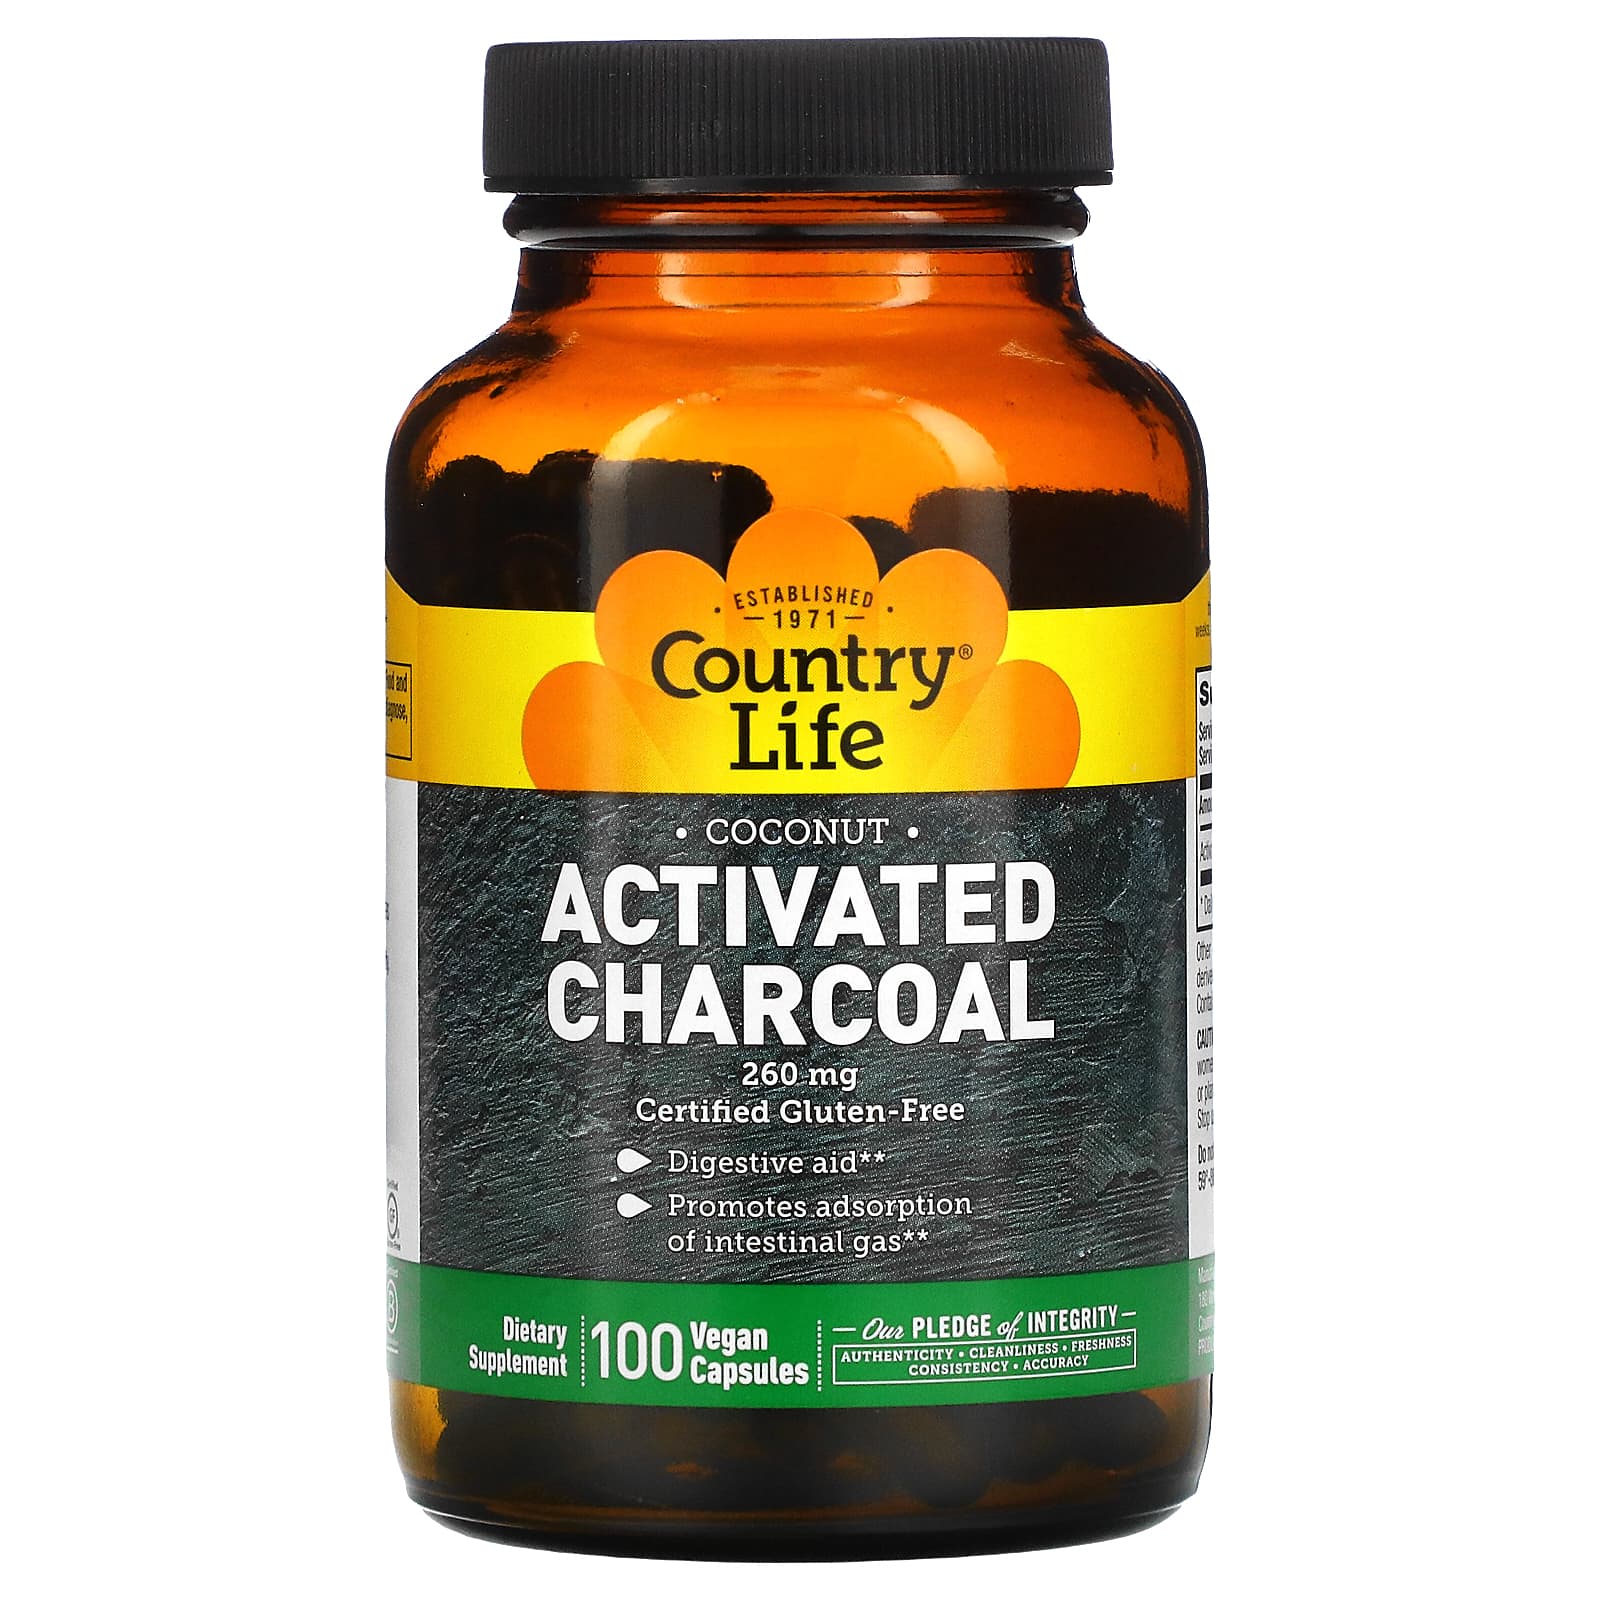 Country Life Activated Charcoal Capsules, 260 Mg